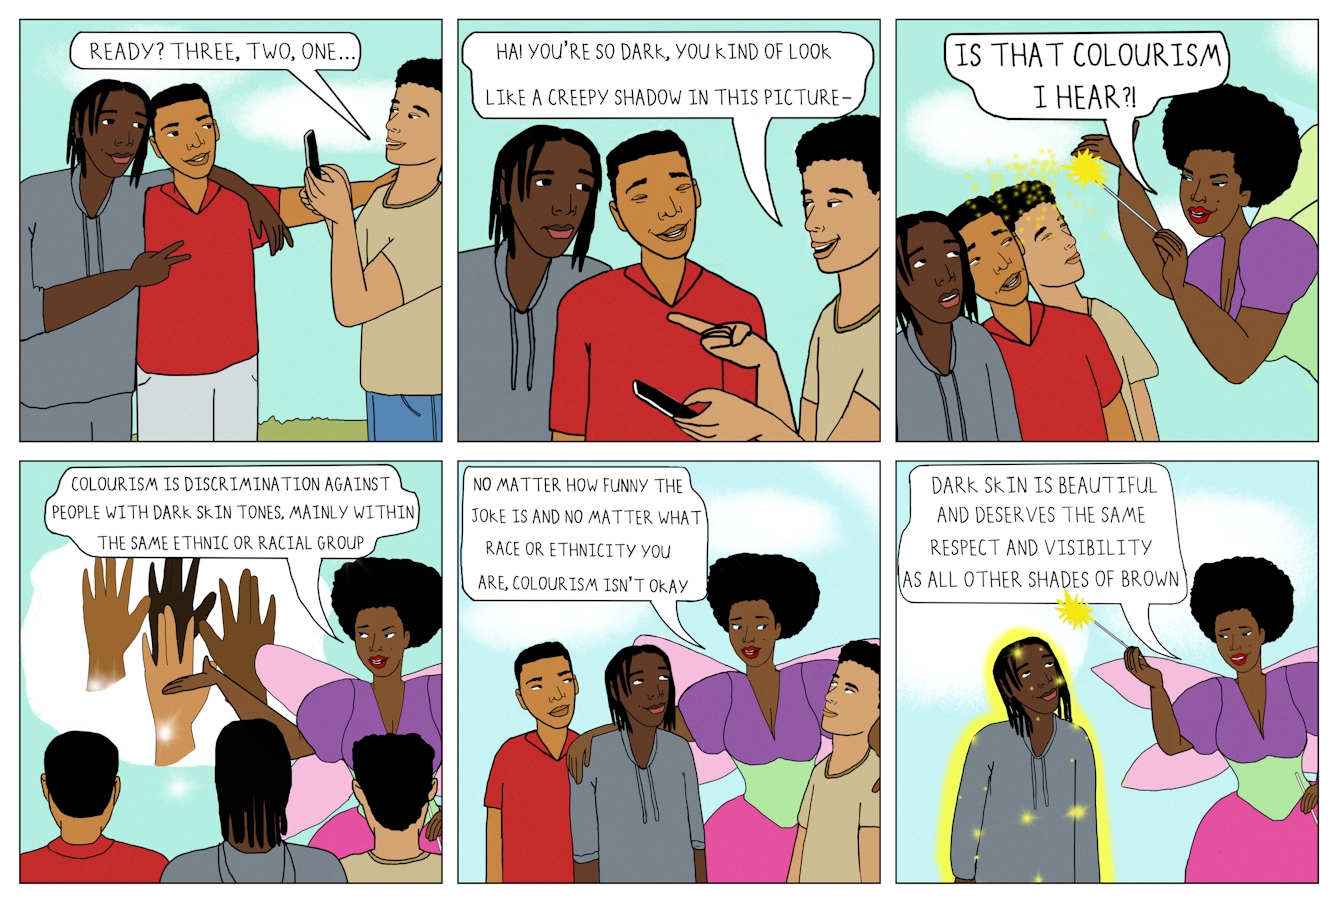 Six panel colour comic strip in a grid of 3 panels wide by 2 panels high.

The first panel shows three Black teenage boys with varying skin tones standing outdoors. Two boys are posing for a photo and smiling. The first boy, with a skin tone that's darker than the others, is wearing a grey tracksuit and is making a peace sign with his fingers. His other arm rests around the shoulders of the second boy, who is wearing a red shirt. The third boy, wearing a beige t-shirt, is taking the photo on his phone. A speech bubble comes from his mouth and reads “Ready? Three, two, one…”

The second panel shows the same characters. The boy in the beige t-shirt, after reviewing the photo, points at the boy in the grey tracksuit and says, “Ha! you’re so dark, you kind of look like a creepy shadow in this picture-”. The boy in the red shirt is laughing in agreement, but the boy in the grey tracksuit looks hurt.

The third panel shows the same three boys, but a Black woman dressed in a bright dress with fairy wings has appeared next to them. She is holding a wand and wearing colourful makeup. The three boys look up in awe as fairy dust falls on their heads from the wand. A speech bubble from the fairy reads “Is that colourism I hear?!”

The fourth panel shows the fairy gesturing towards four hands that have appeared in a thought bubble. The hands all have a different skin tone. The three boys are facing the thought bubble. A speech bubble from the fairy reads “Colourism is discrimination against people with dark skin tones, mainly within the same ethnic or racial group.”

The fifth panel shows the fairy with one arm around the boy in the grey tracksuit and one arm around the boy in the beige t-shirt, at whom she is looking. The boy in the red t-shirt is standing beside them. All three boys are looking up at the fairy and listening attentively as she says, “No matter how funny the joke is and no matter what race or ethnicity you are, colourism isn’t okay.”

The sixth panel shows the fairy waving her wand over the boy in the grey tracksuit. He is covered in fairy dust from the wand and is looking up and smiling. A speech bubble from the smiling fairy reads “Dark skin is beautiful and deserves the same respect and visibility as all other shades of brown.”